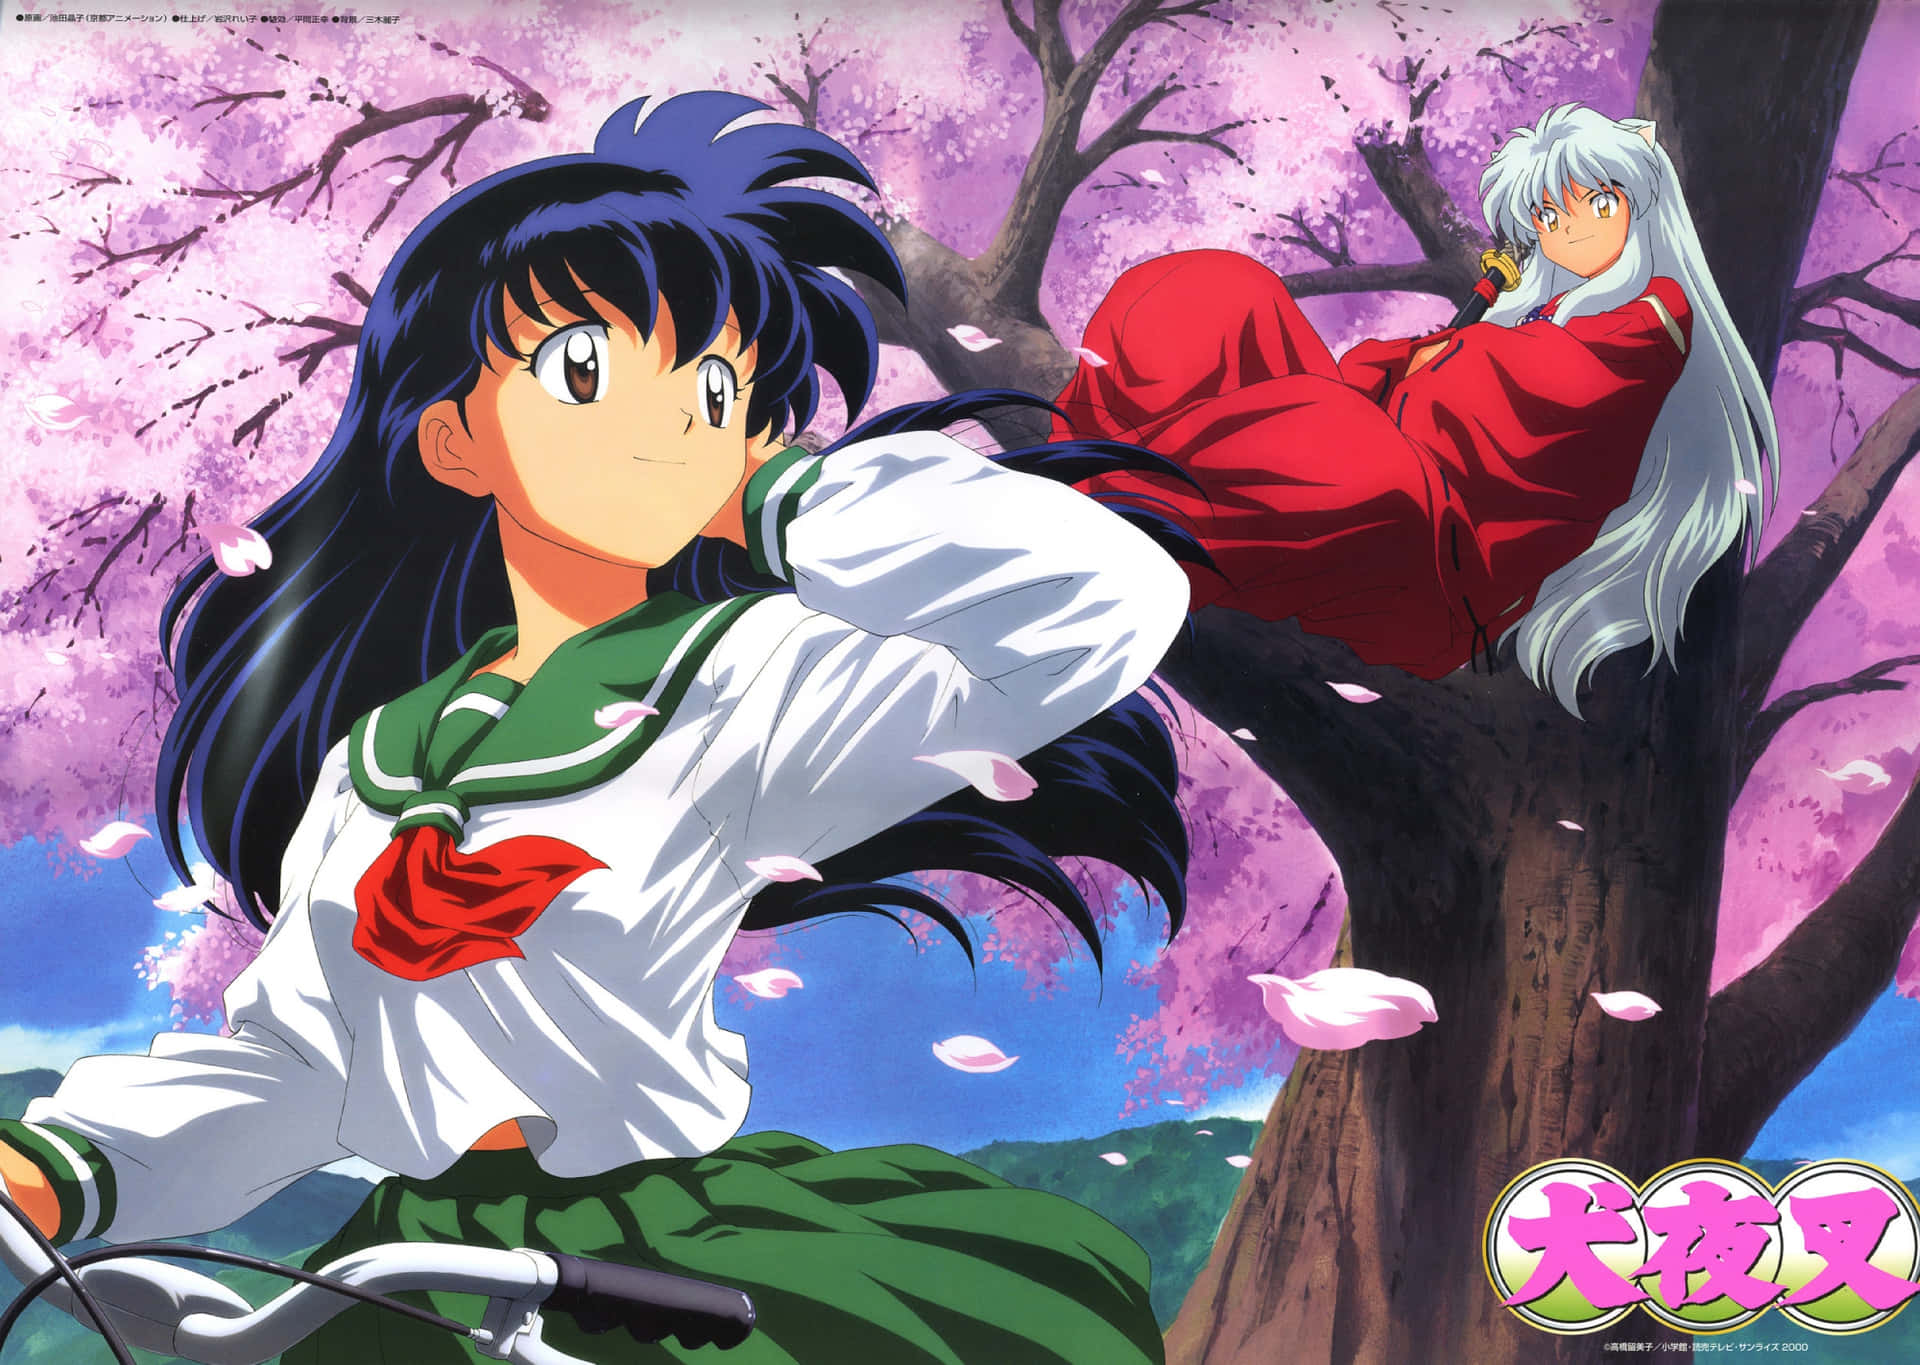 Inuyasha the half-demon stands proud with Tetsusaiga in hand, ready to destroy evil.